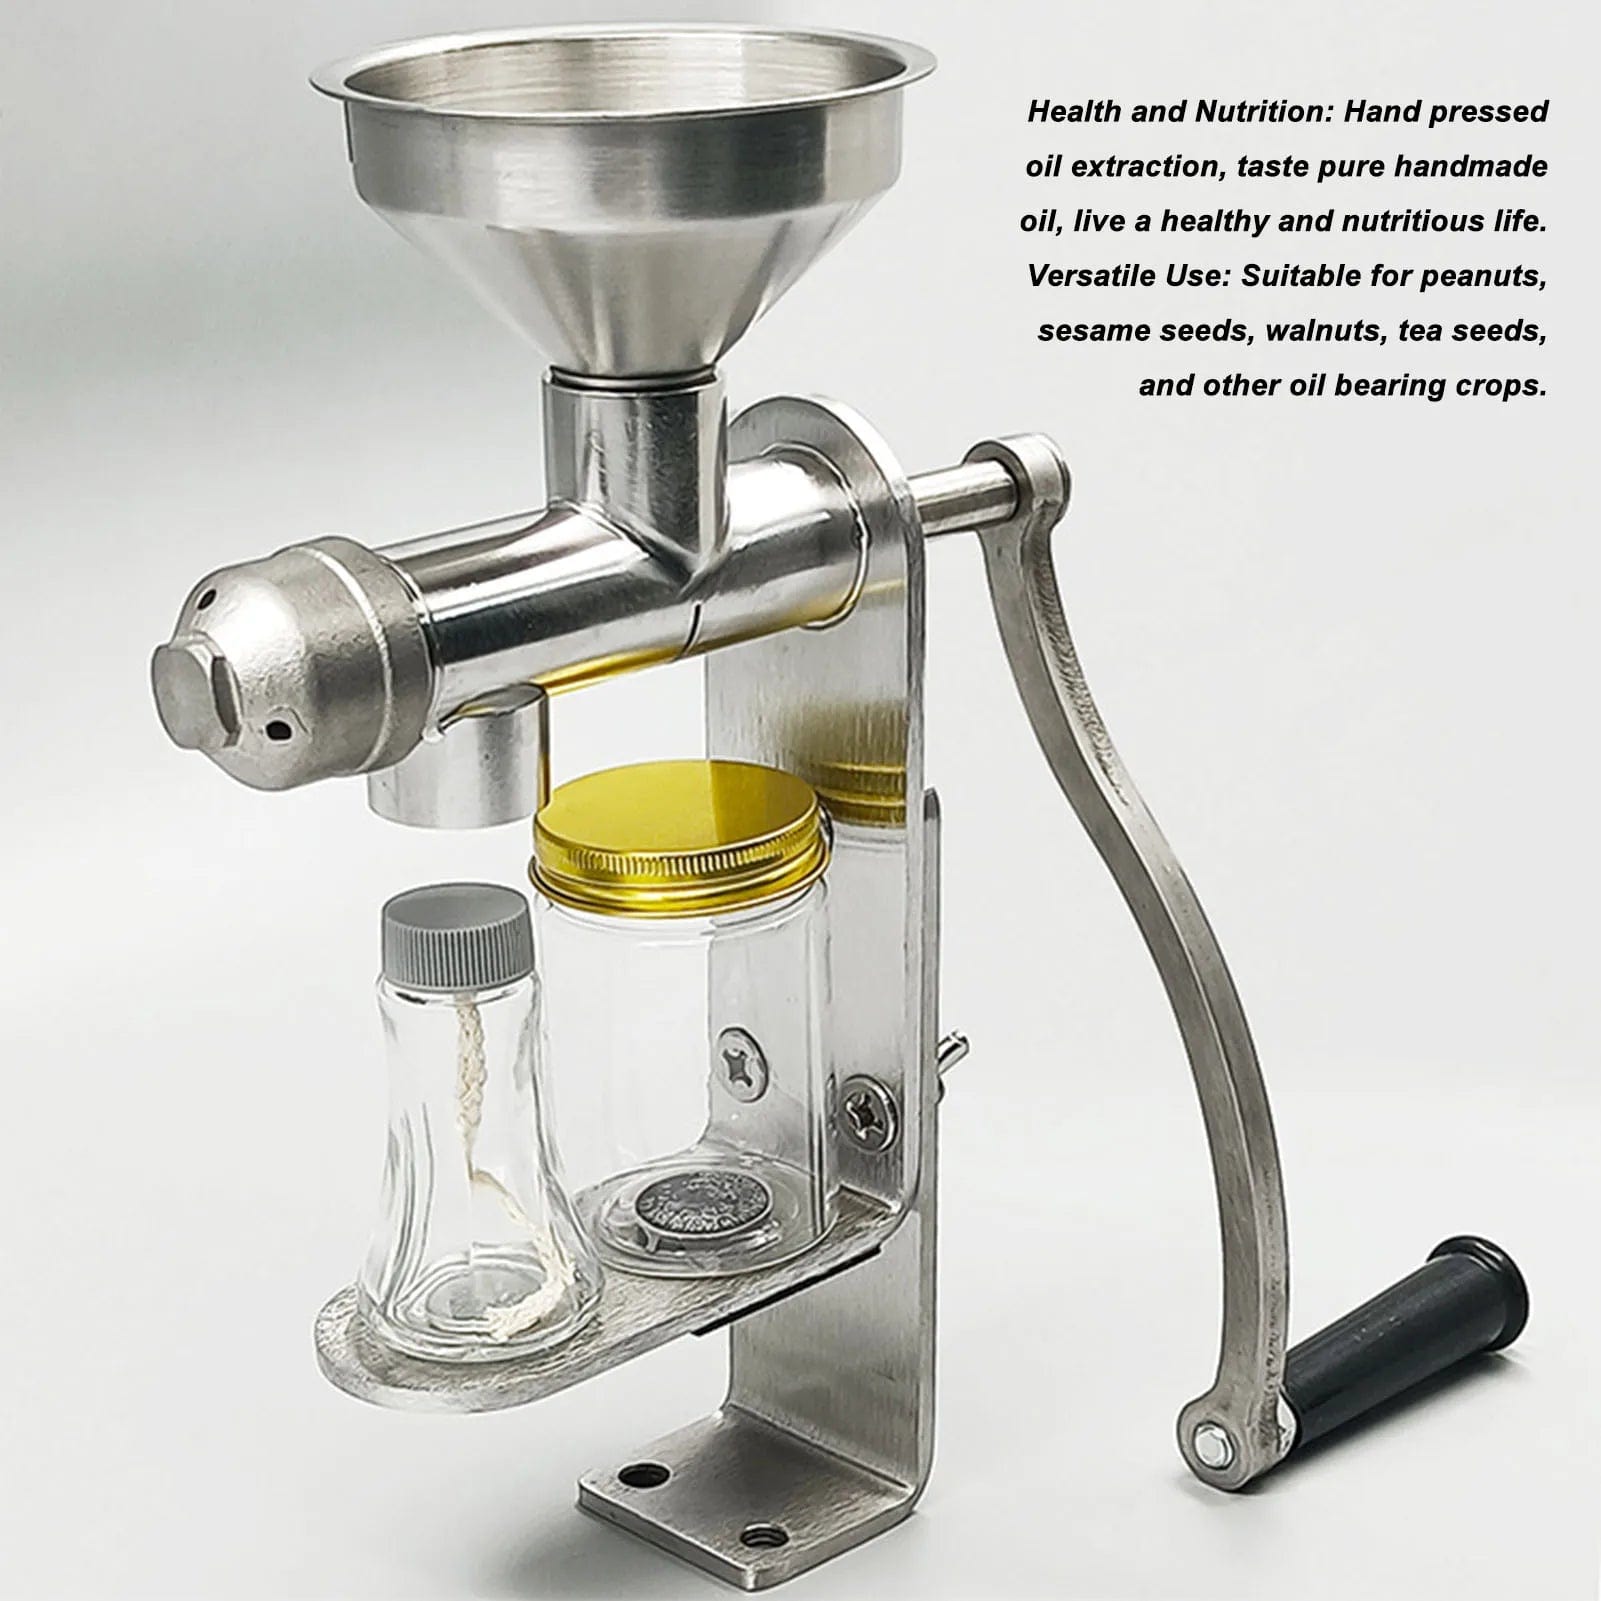 HomeBound Essentials Manual Oil Press Machine - Stainless Steel Cold and Hot Press Oil Maker for Nuts & Seeds